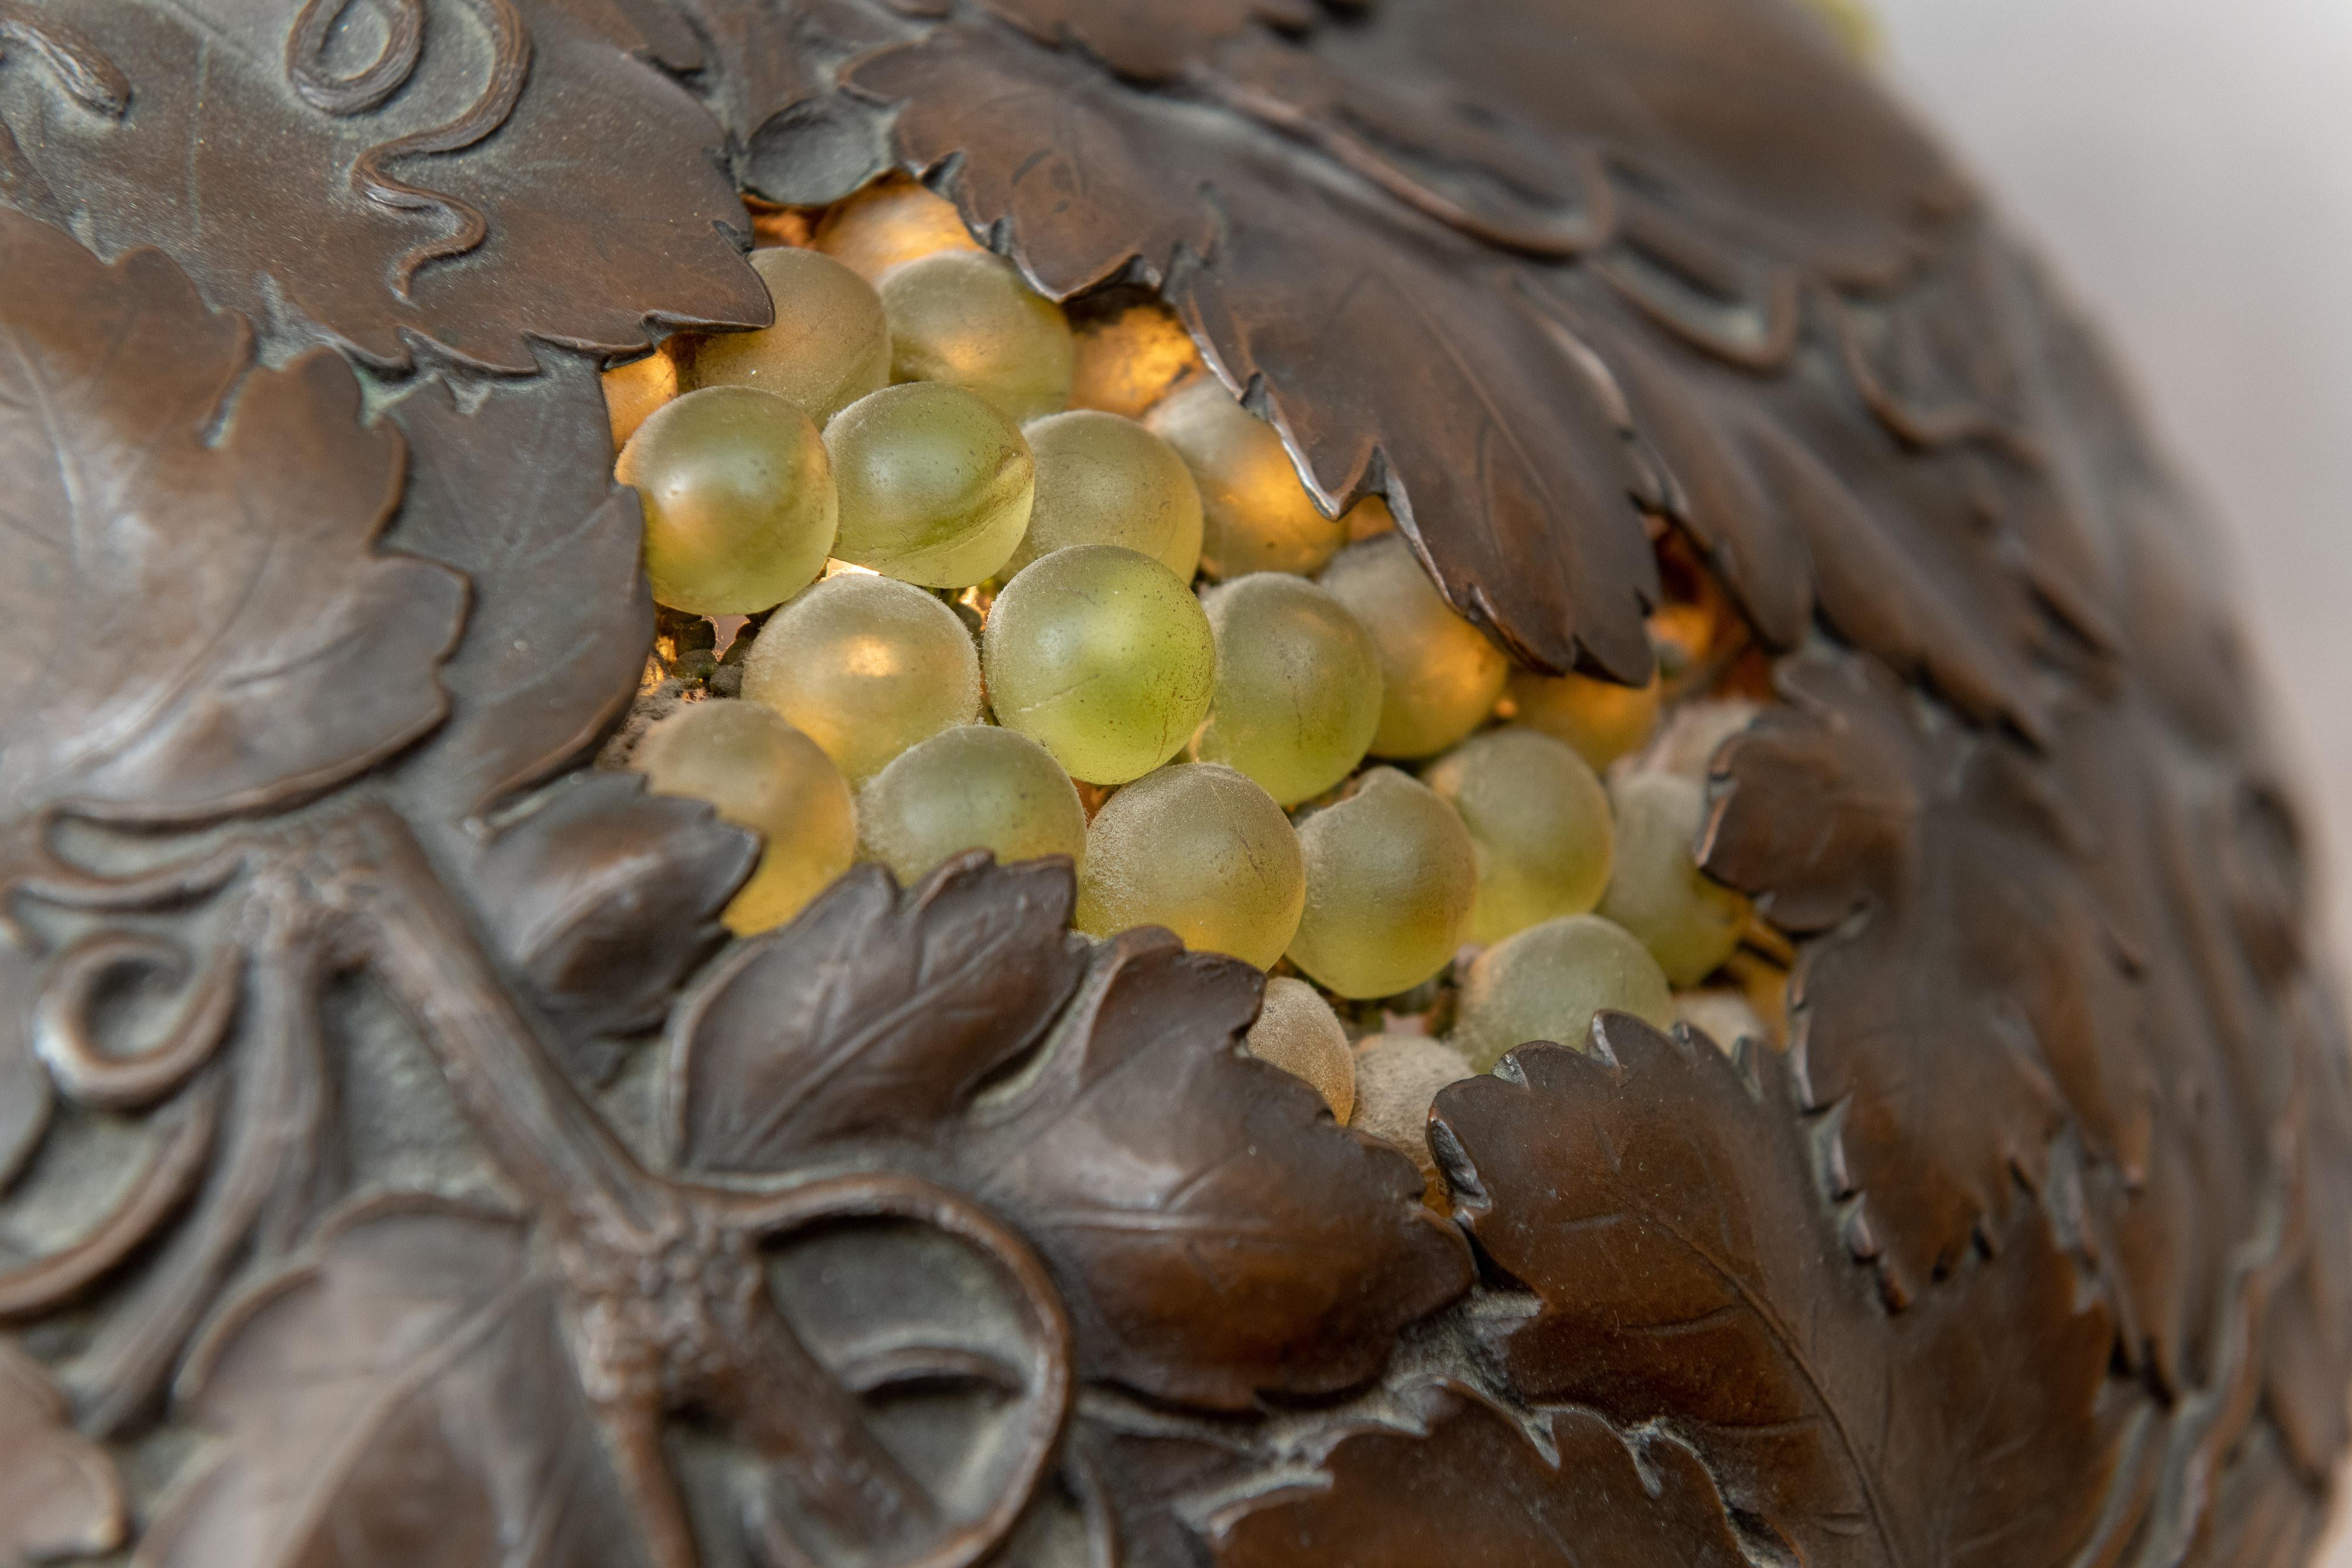 This is one of the best and most exotic lamps we have offered in a long time. The quality of the casting is very special. That lizard looks real, right down to the skin. The shade is very naturalistic and lights behind bunches of glass grapes. The